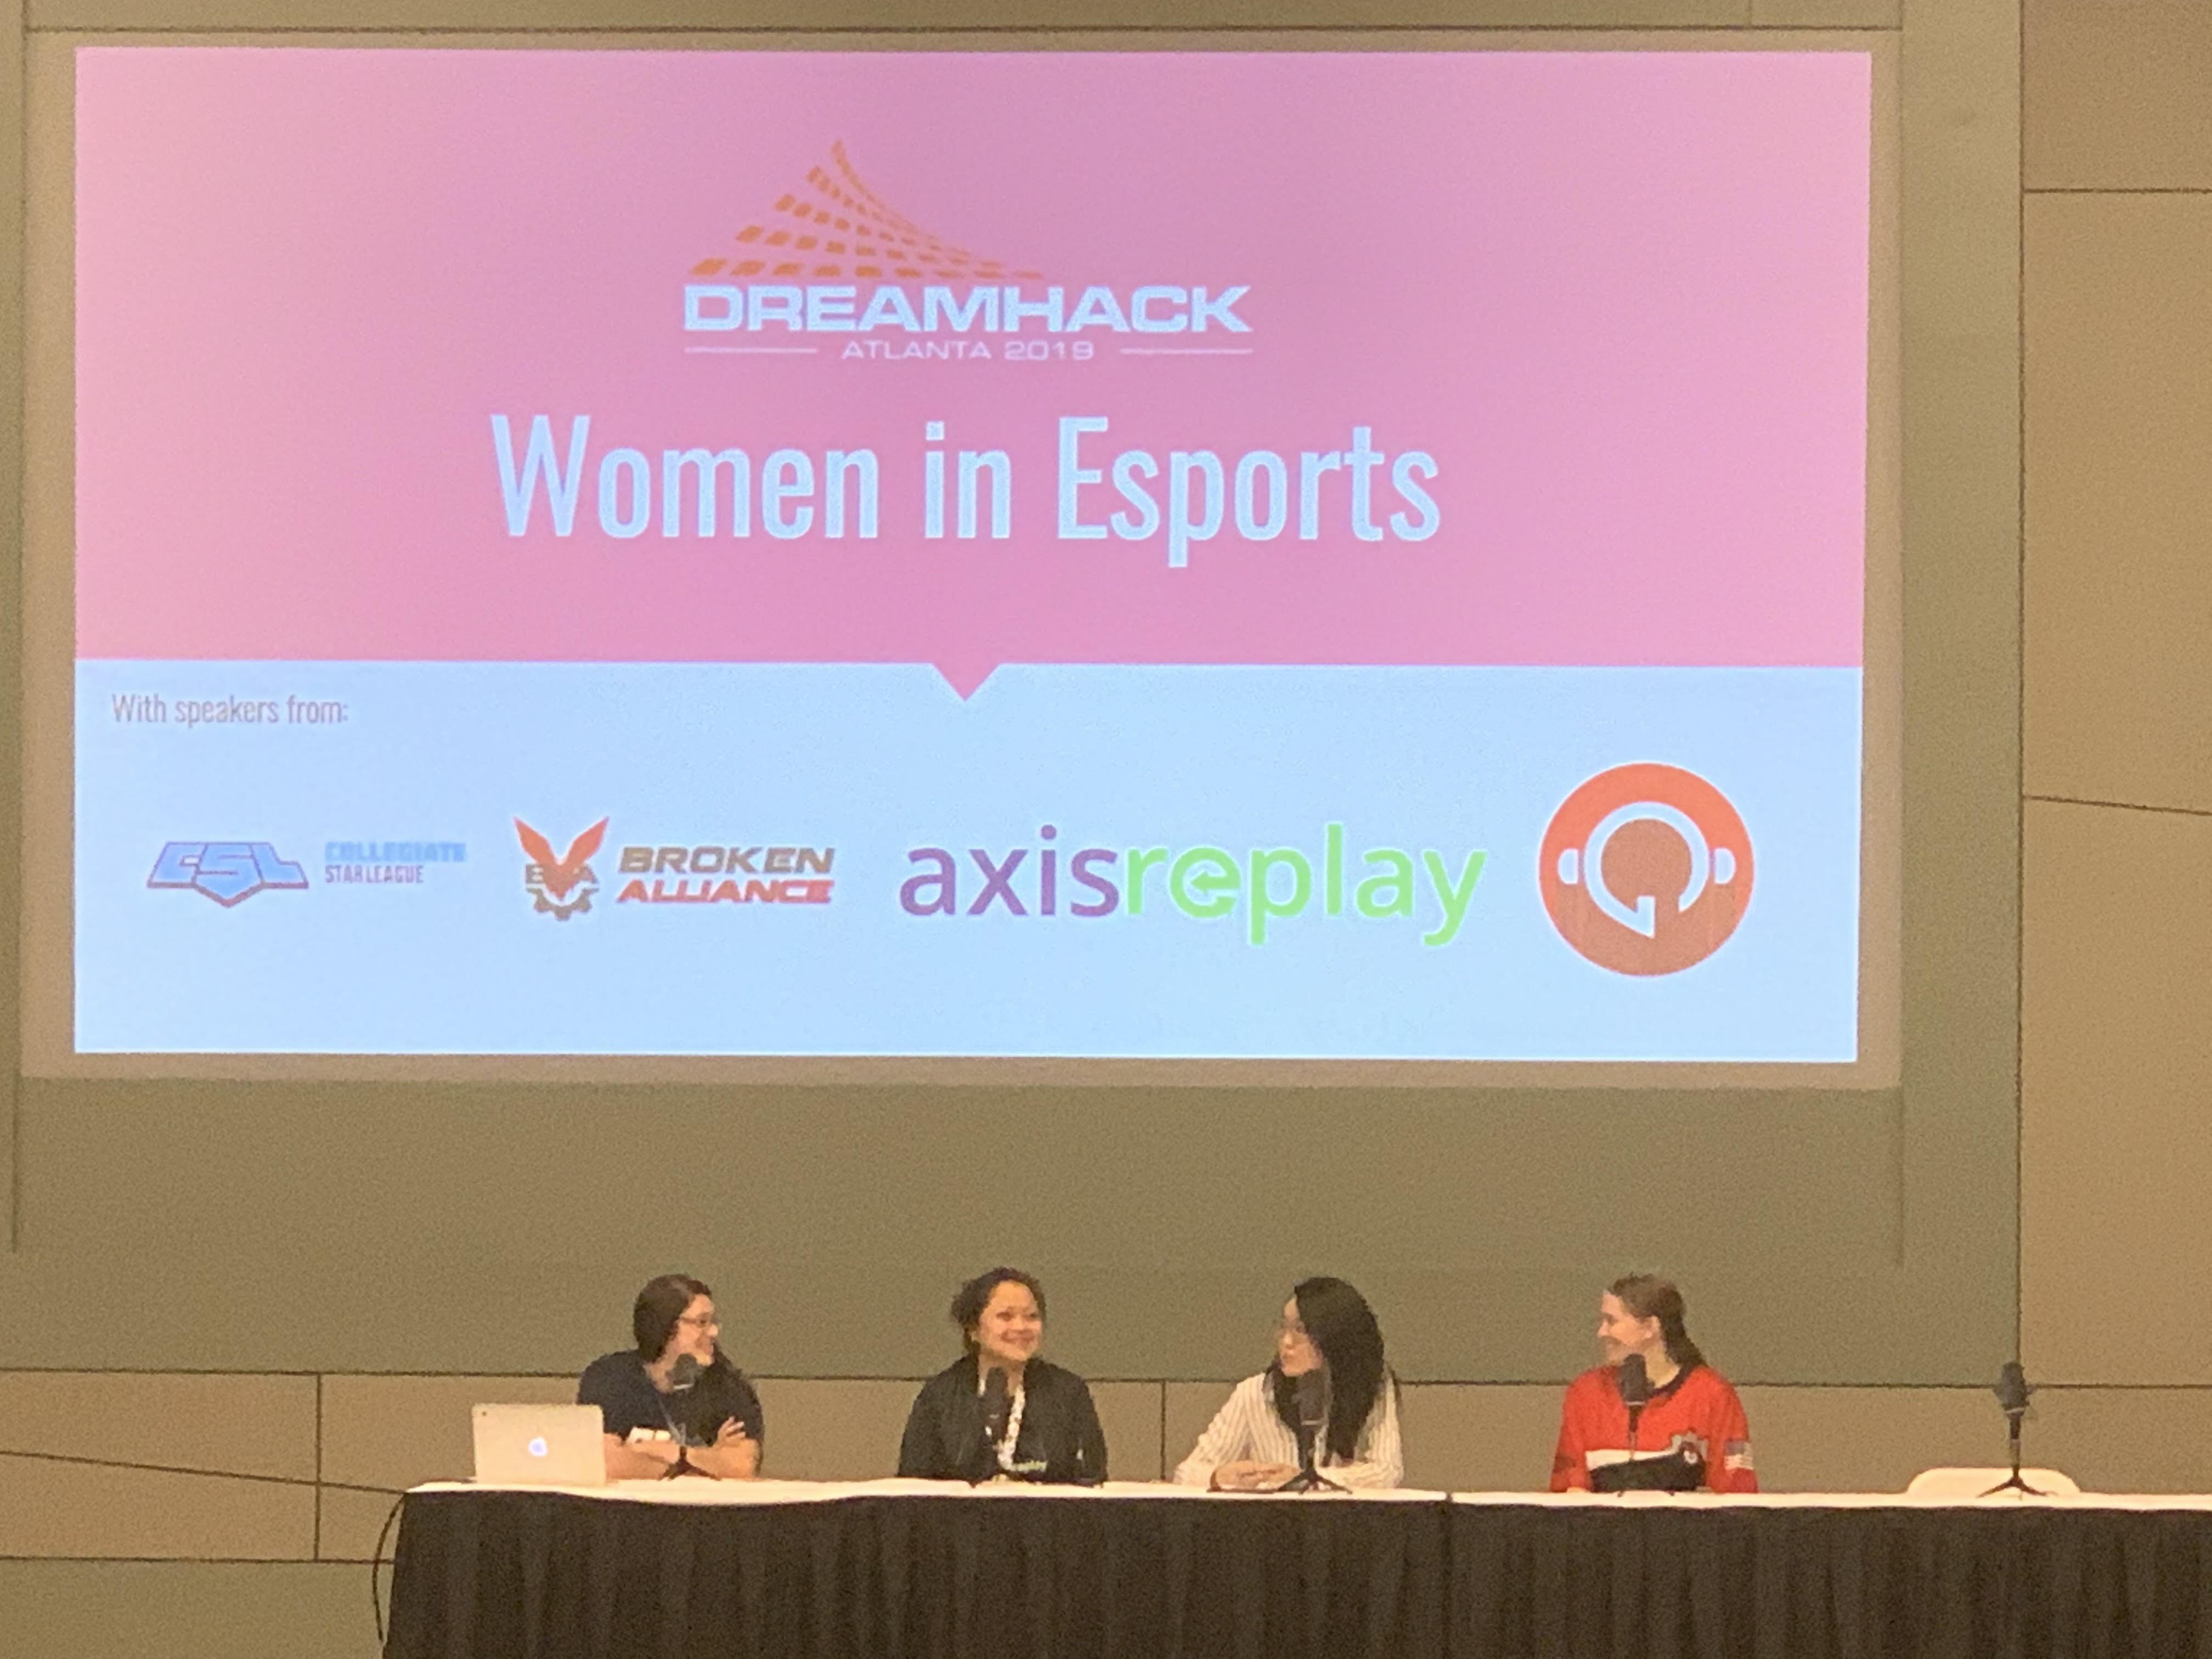 Women in Esports: Top 5 things that will increase their participation 14